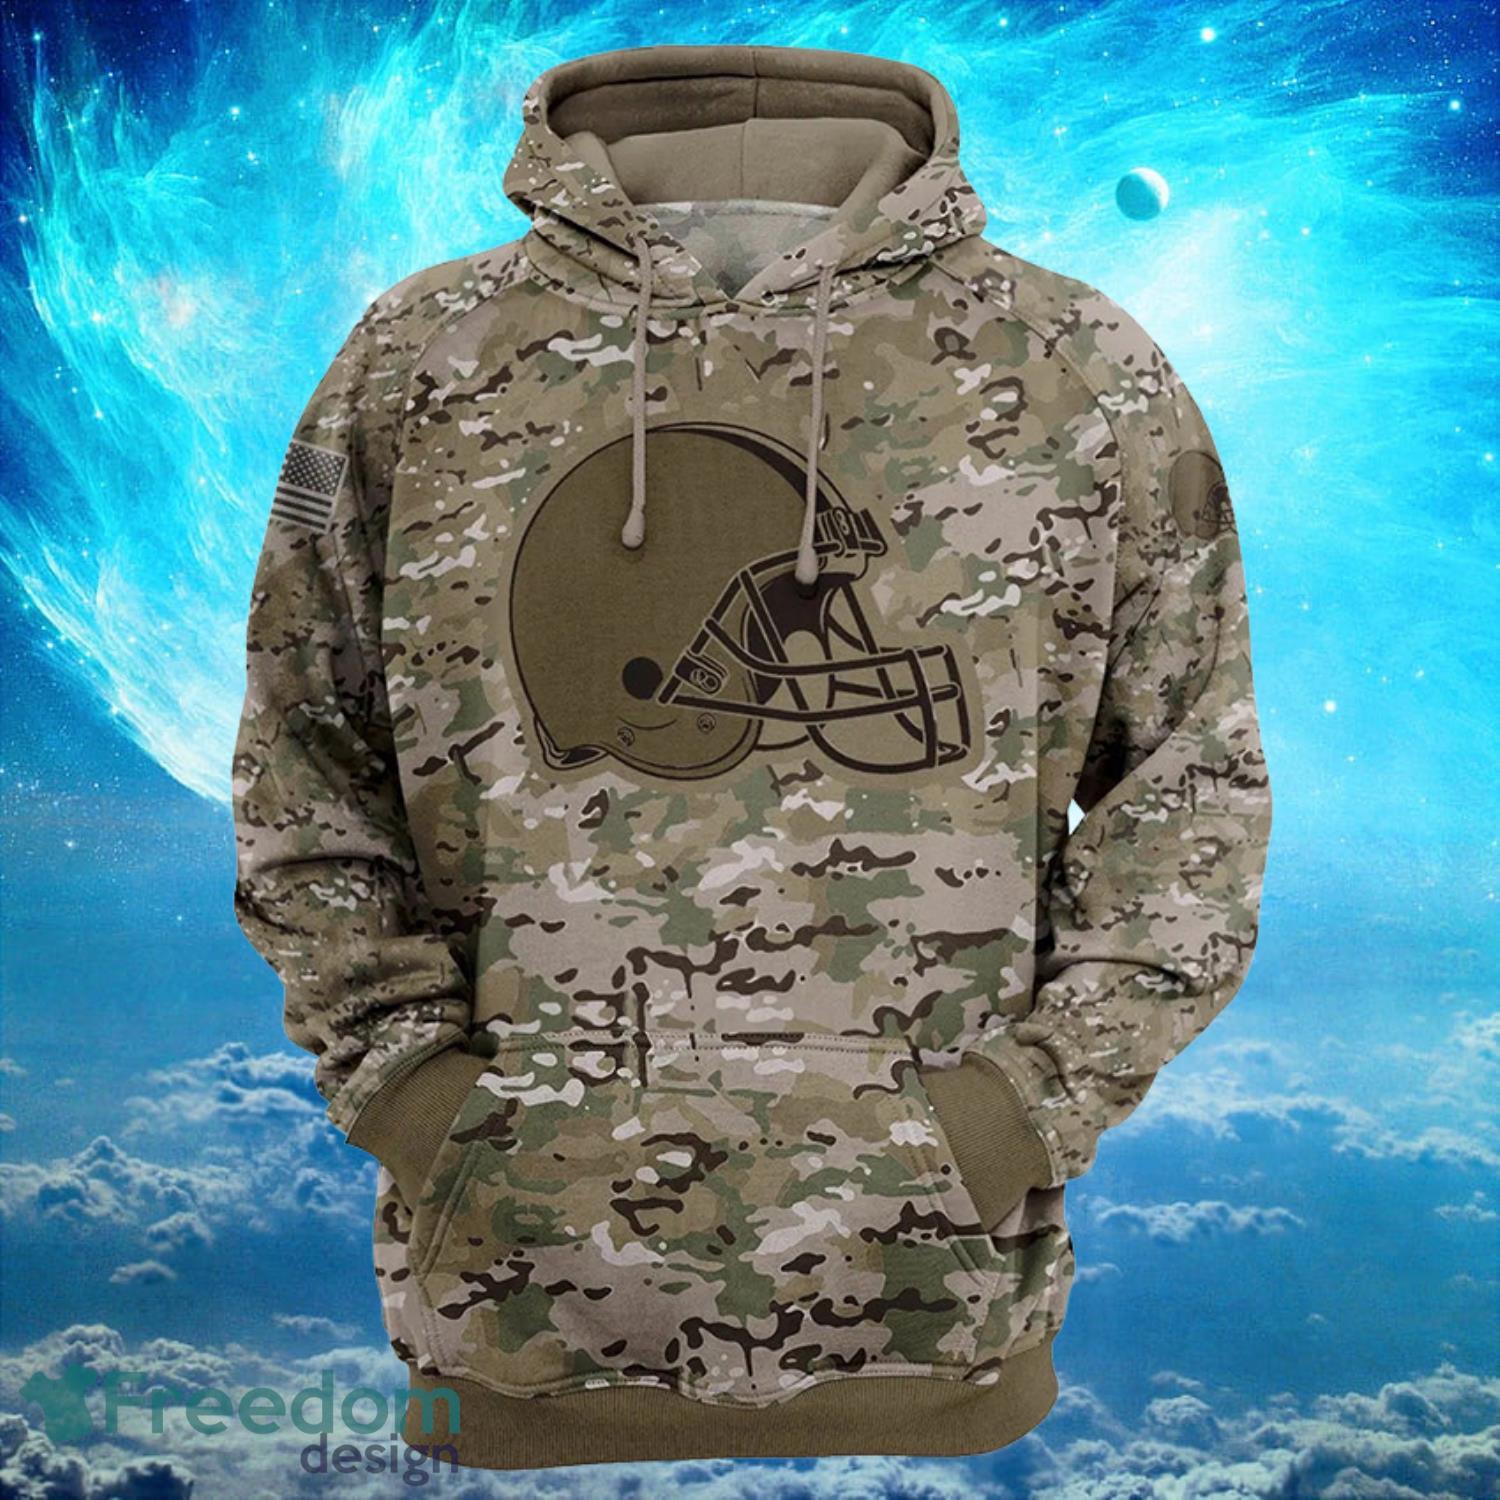 Cleveland Browns Camo Background Hoodies Full Over Print - Freedomdesign